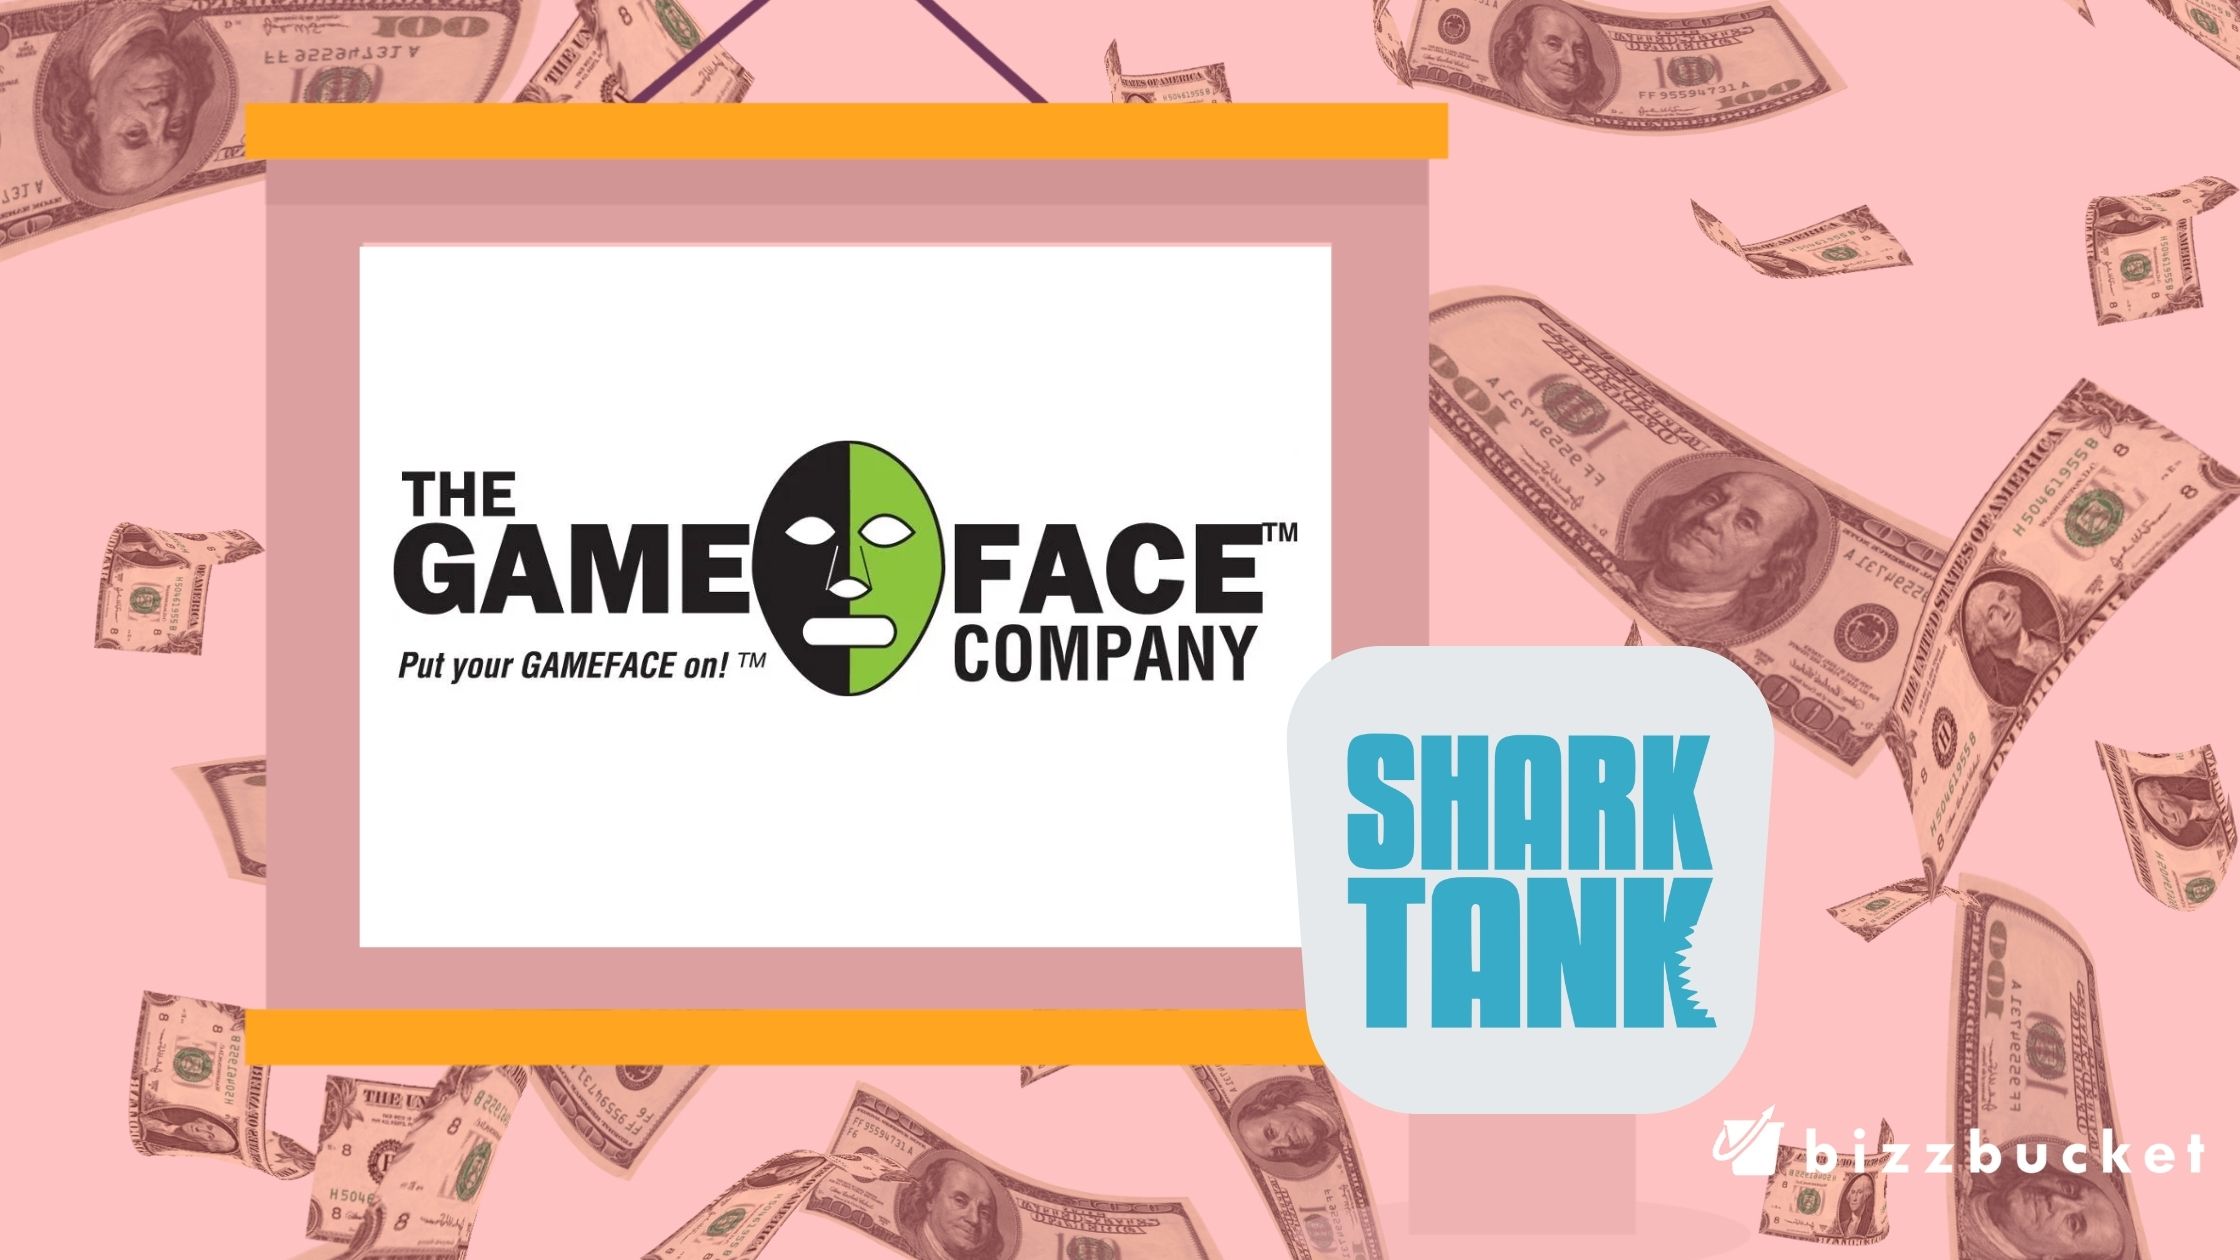 The Gameface Company shark tank update